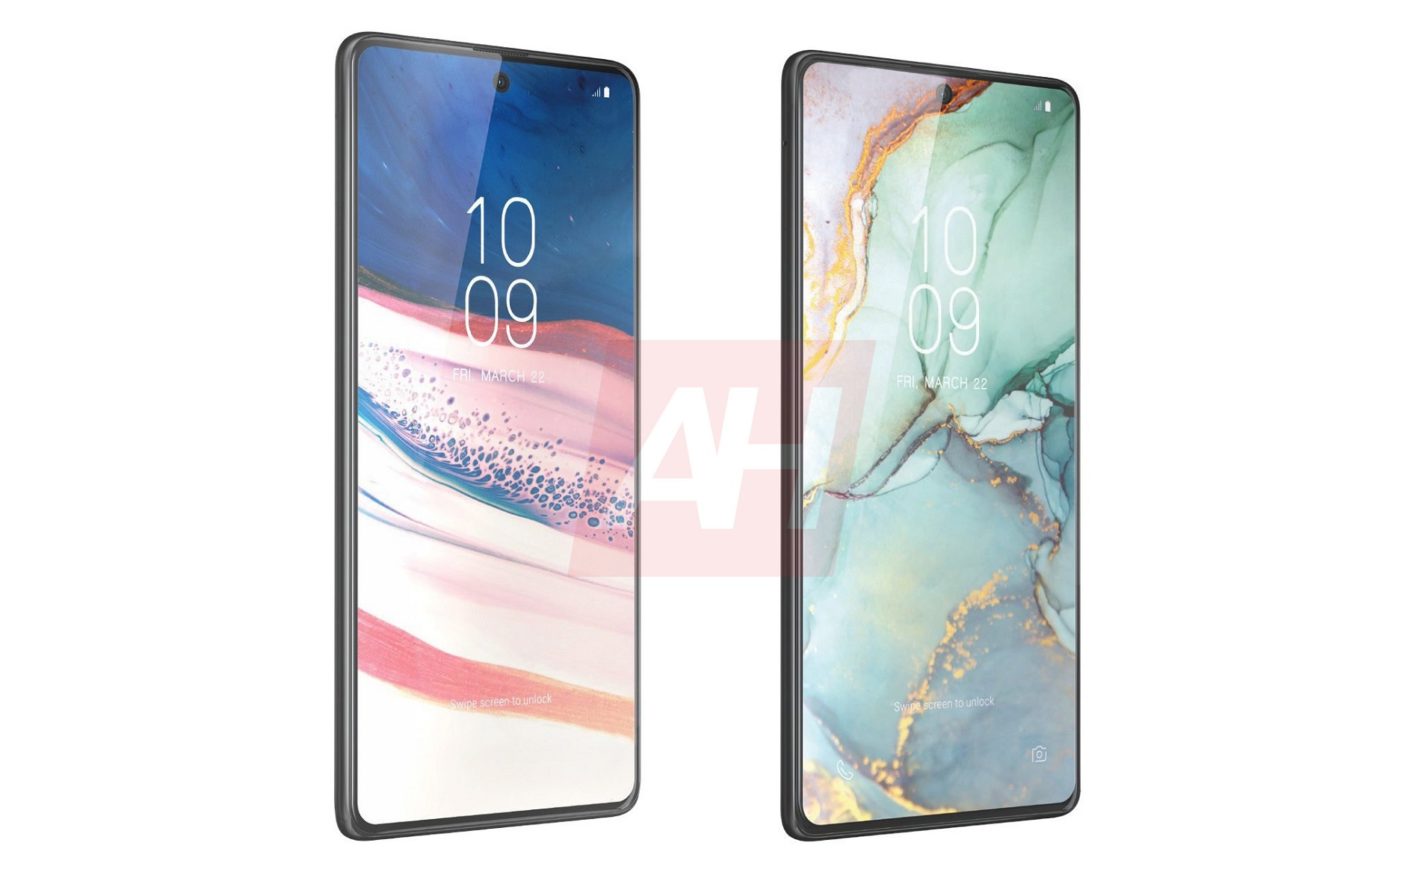 Samsung Galaxy S10 Lite and Note 10 Lite design revealed